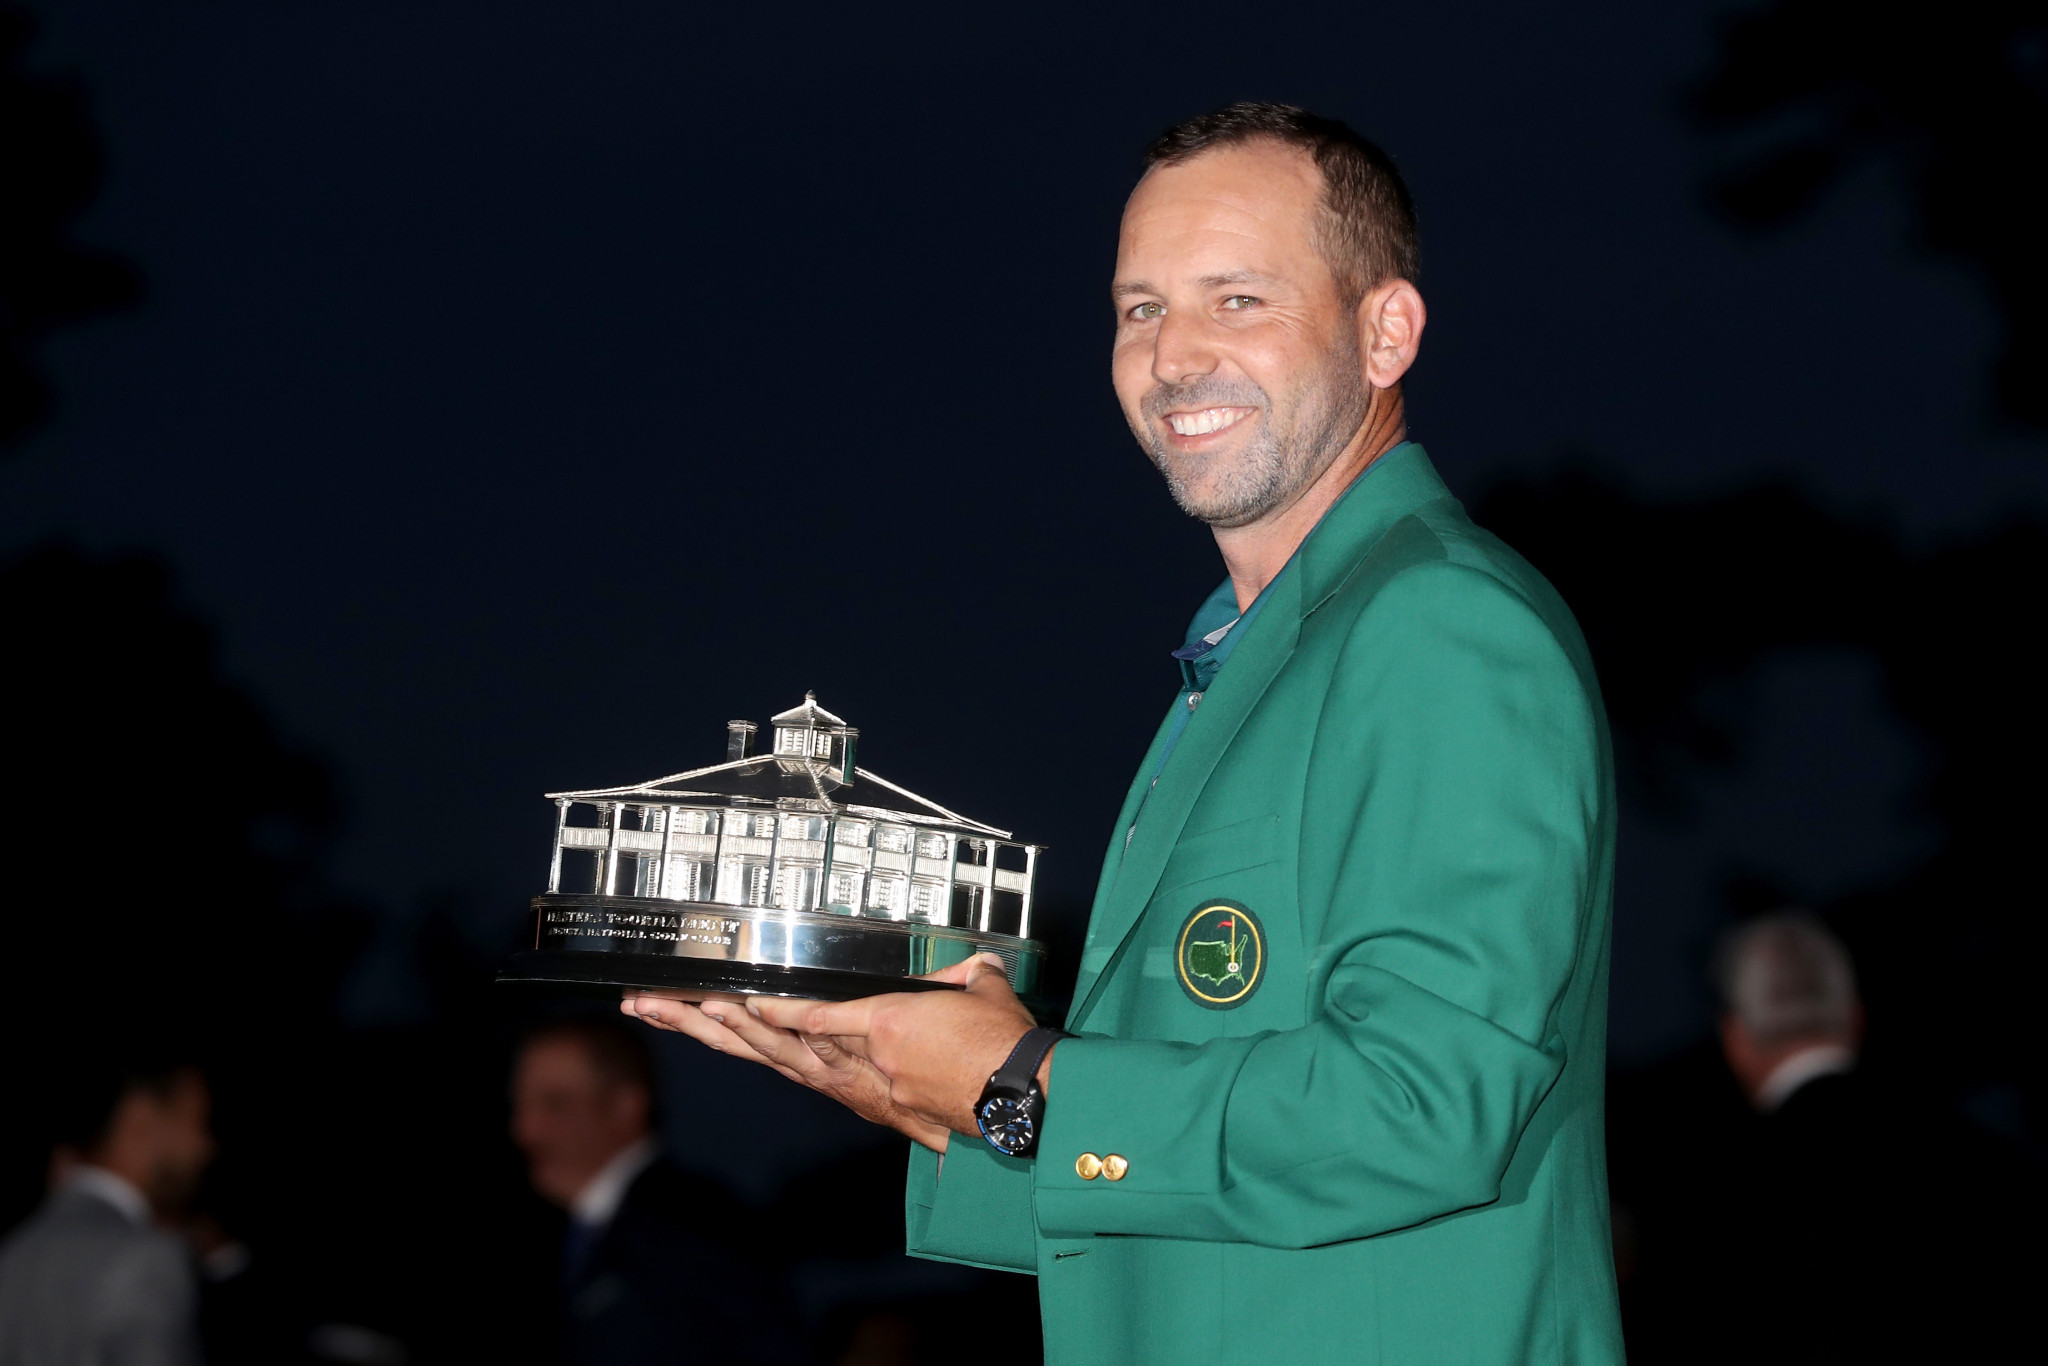 Sergio Garcia won The Masters in 2017 - his first major victory after 22 top-10 finishes ©Getty Images